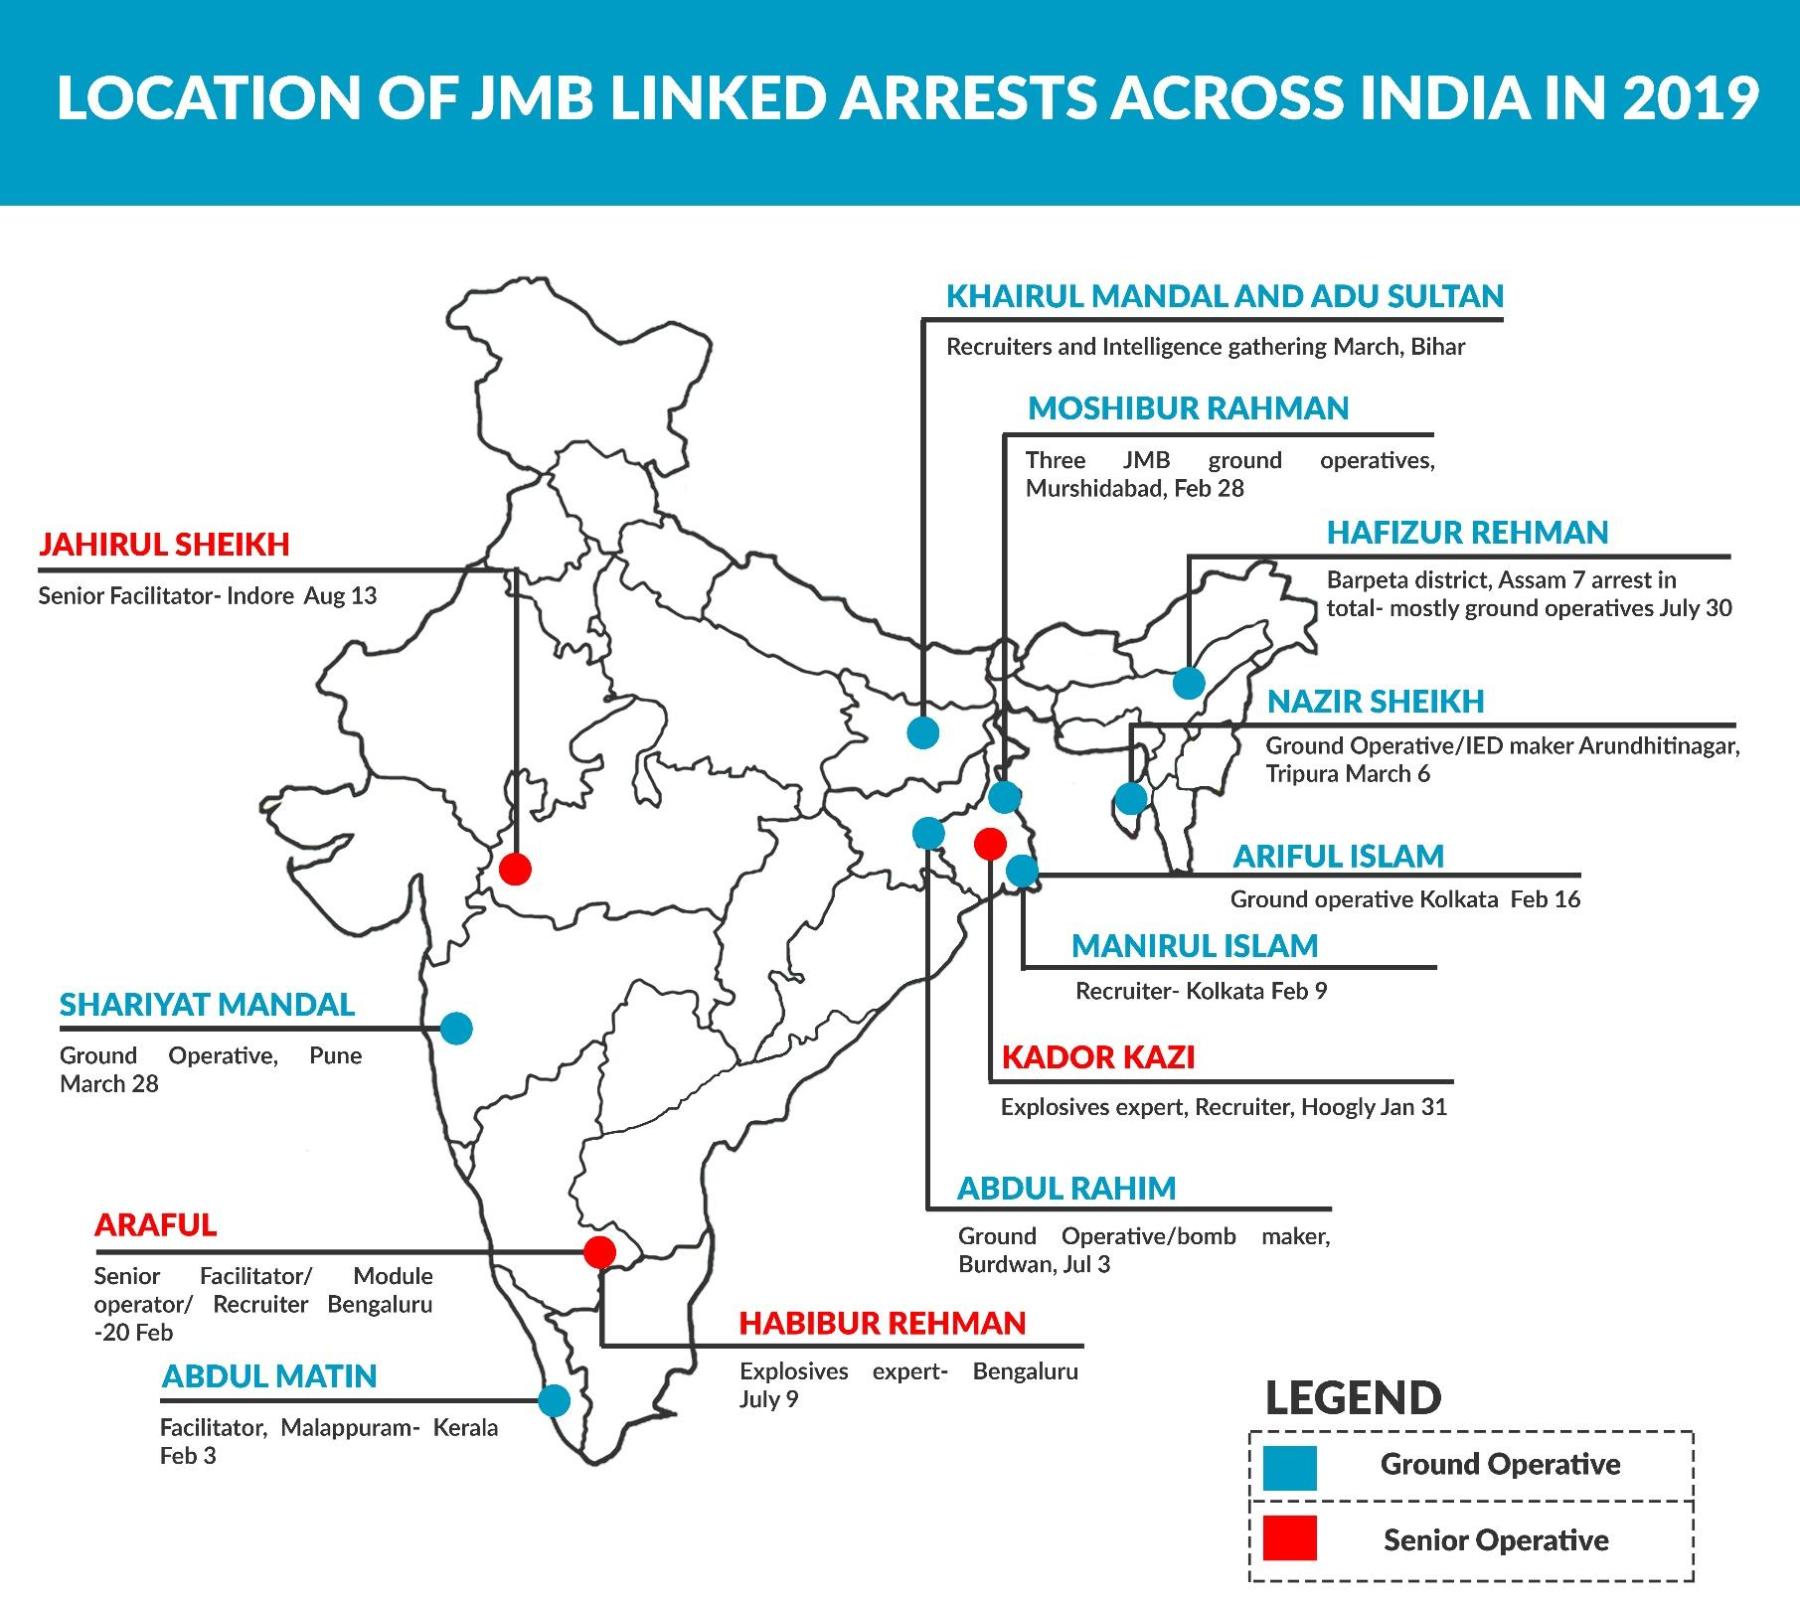 Location of JMB Linked Arrests Across India in 2019